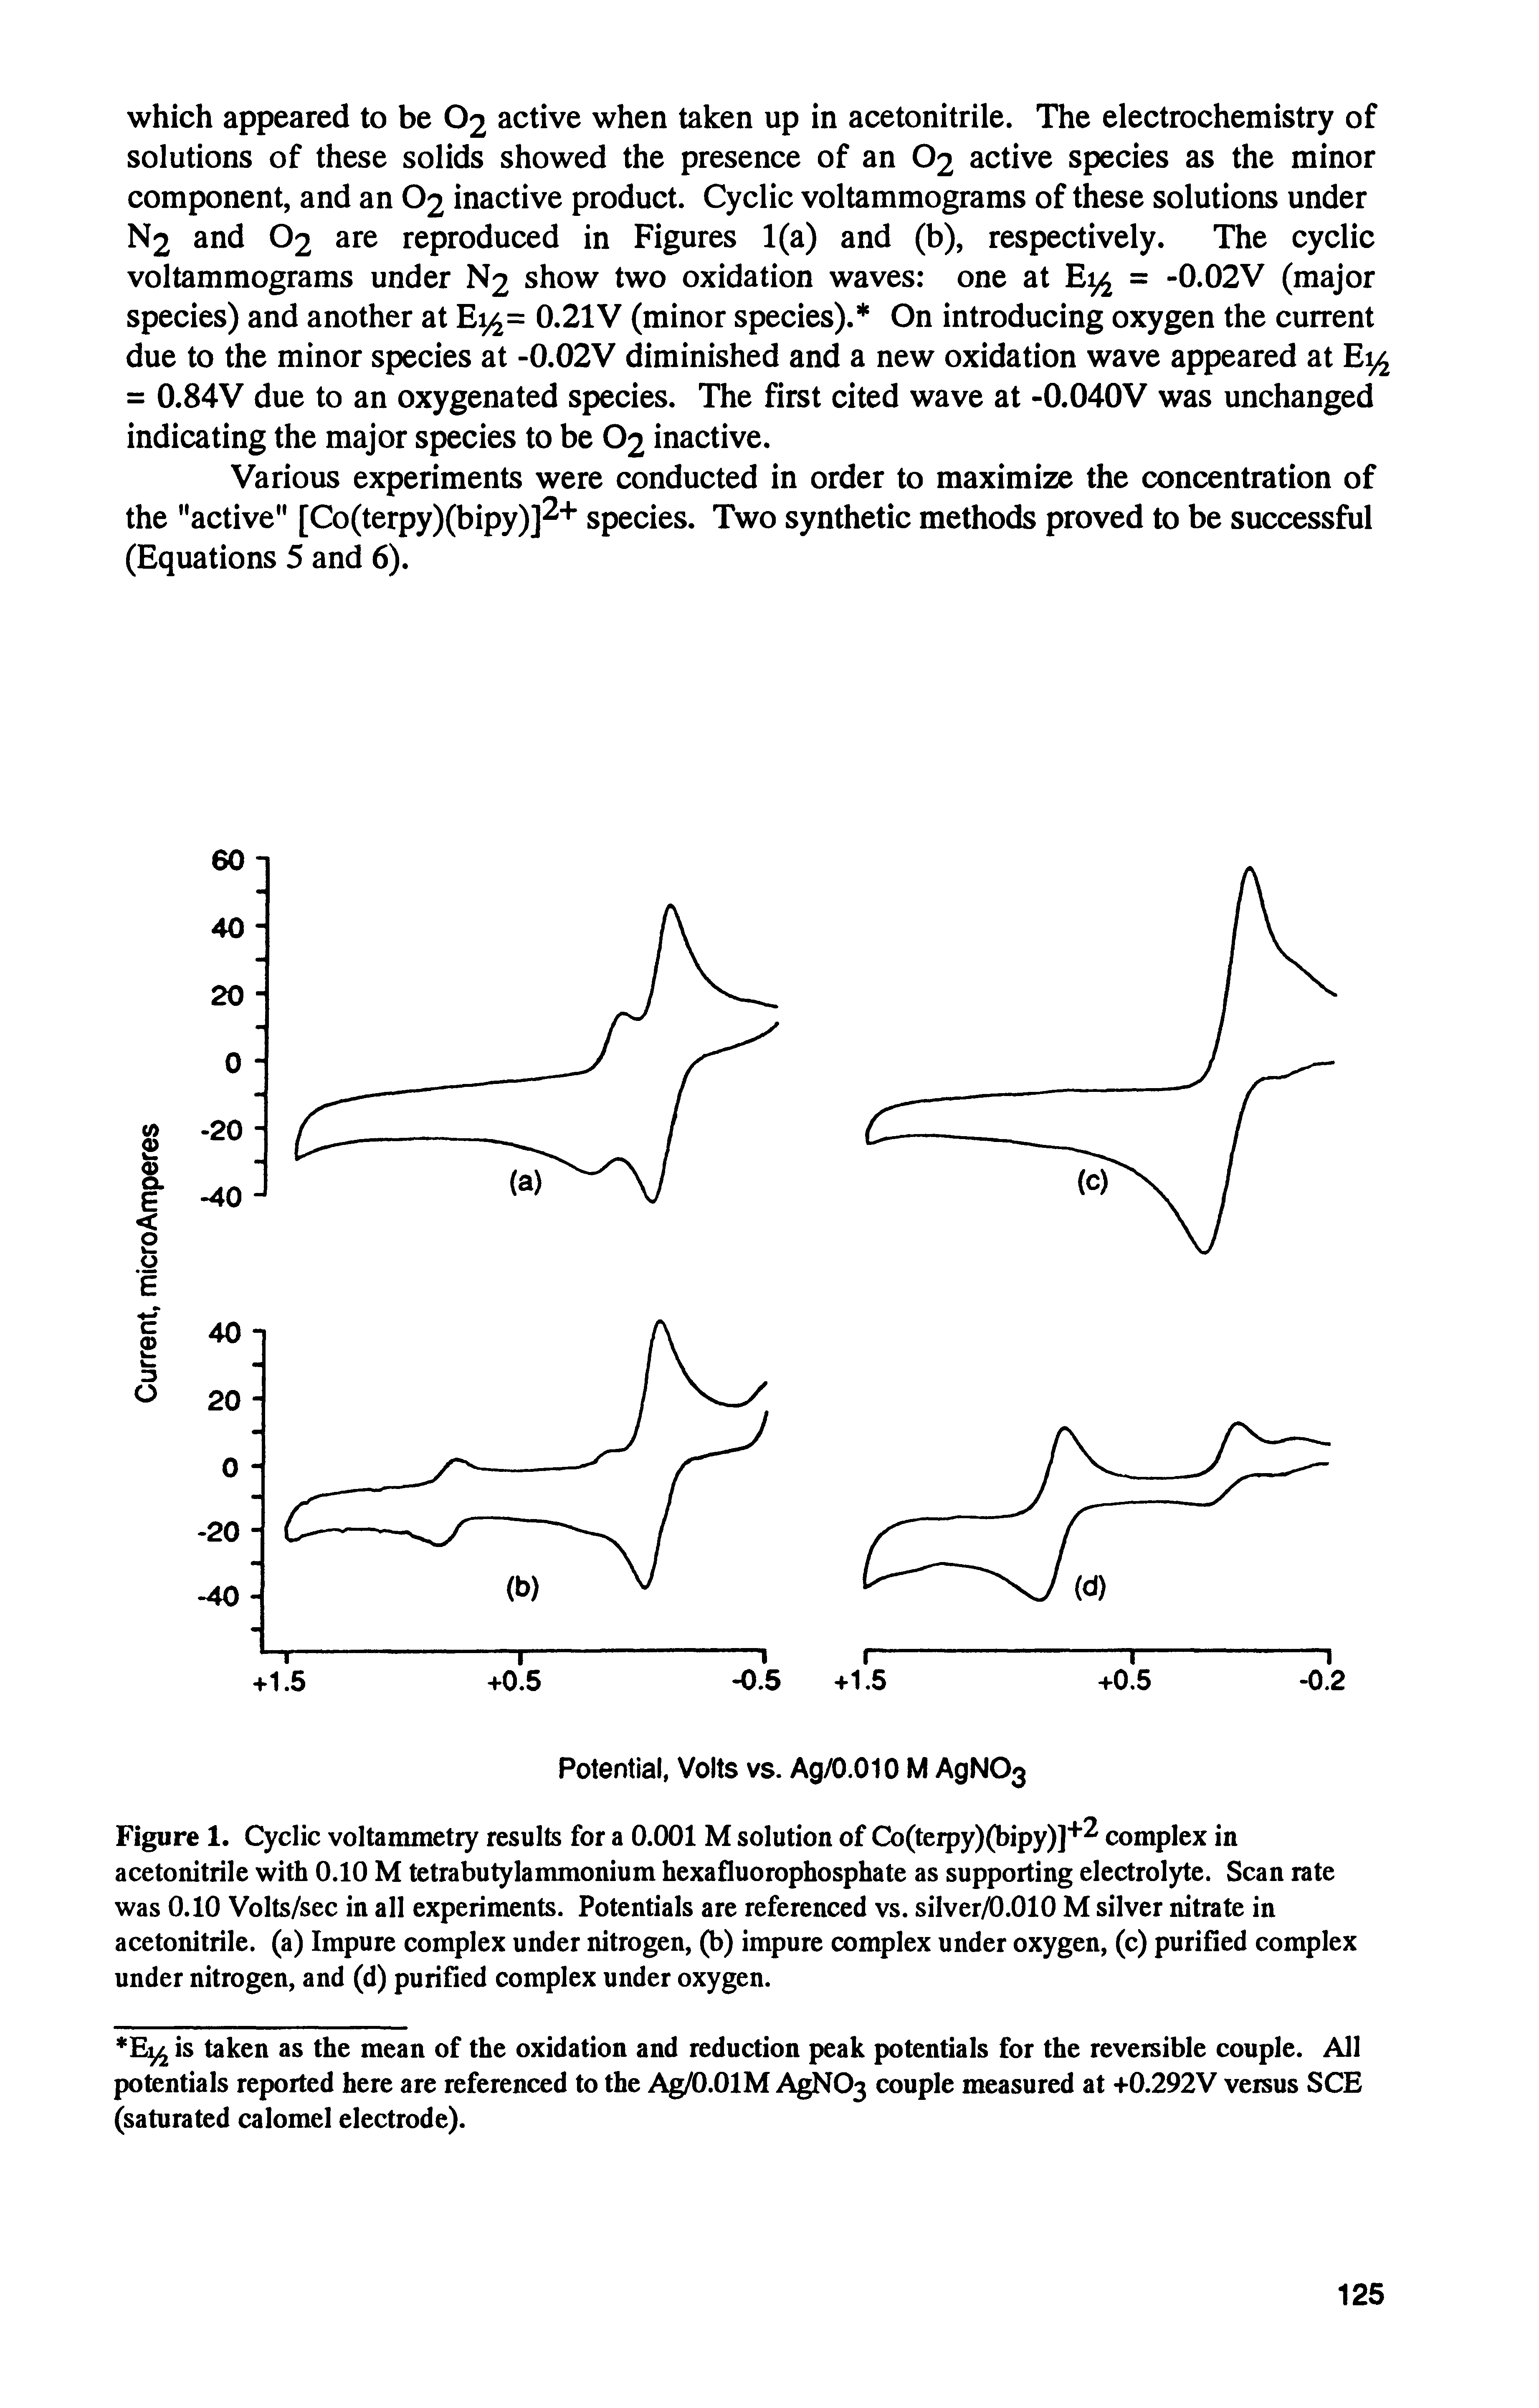 Figure 1. Cyclic voltammetry resulls for a 0.001 M solution of Co(terpy)(bipy)]+ complex in acetonitrile with 0.10 M tetrabutylammonium hexafluorophosphate as supporting electrolyte. Scan rate was 0.10 Volts/sec in all experiments. Potentials are referenced vs. silver/0.010 M silver nitrate in acetonitrile, (a) Impure complex under nitrogen, (b) impure complex under oxygen, (c) purified complex under nitrogen, and (d) purified complex under oxygen.